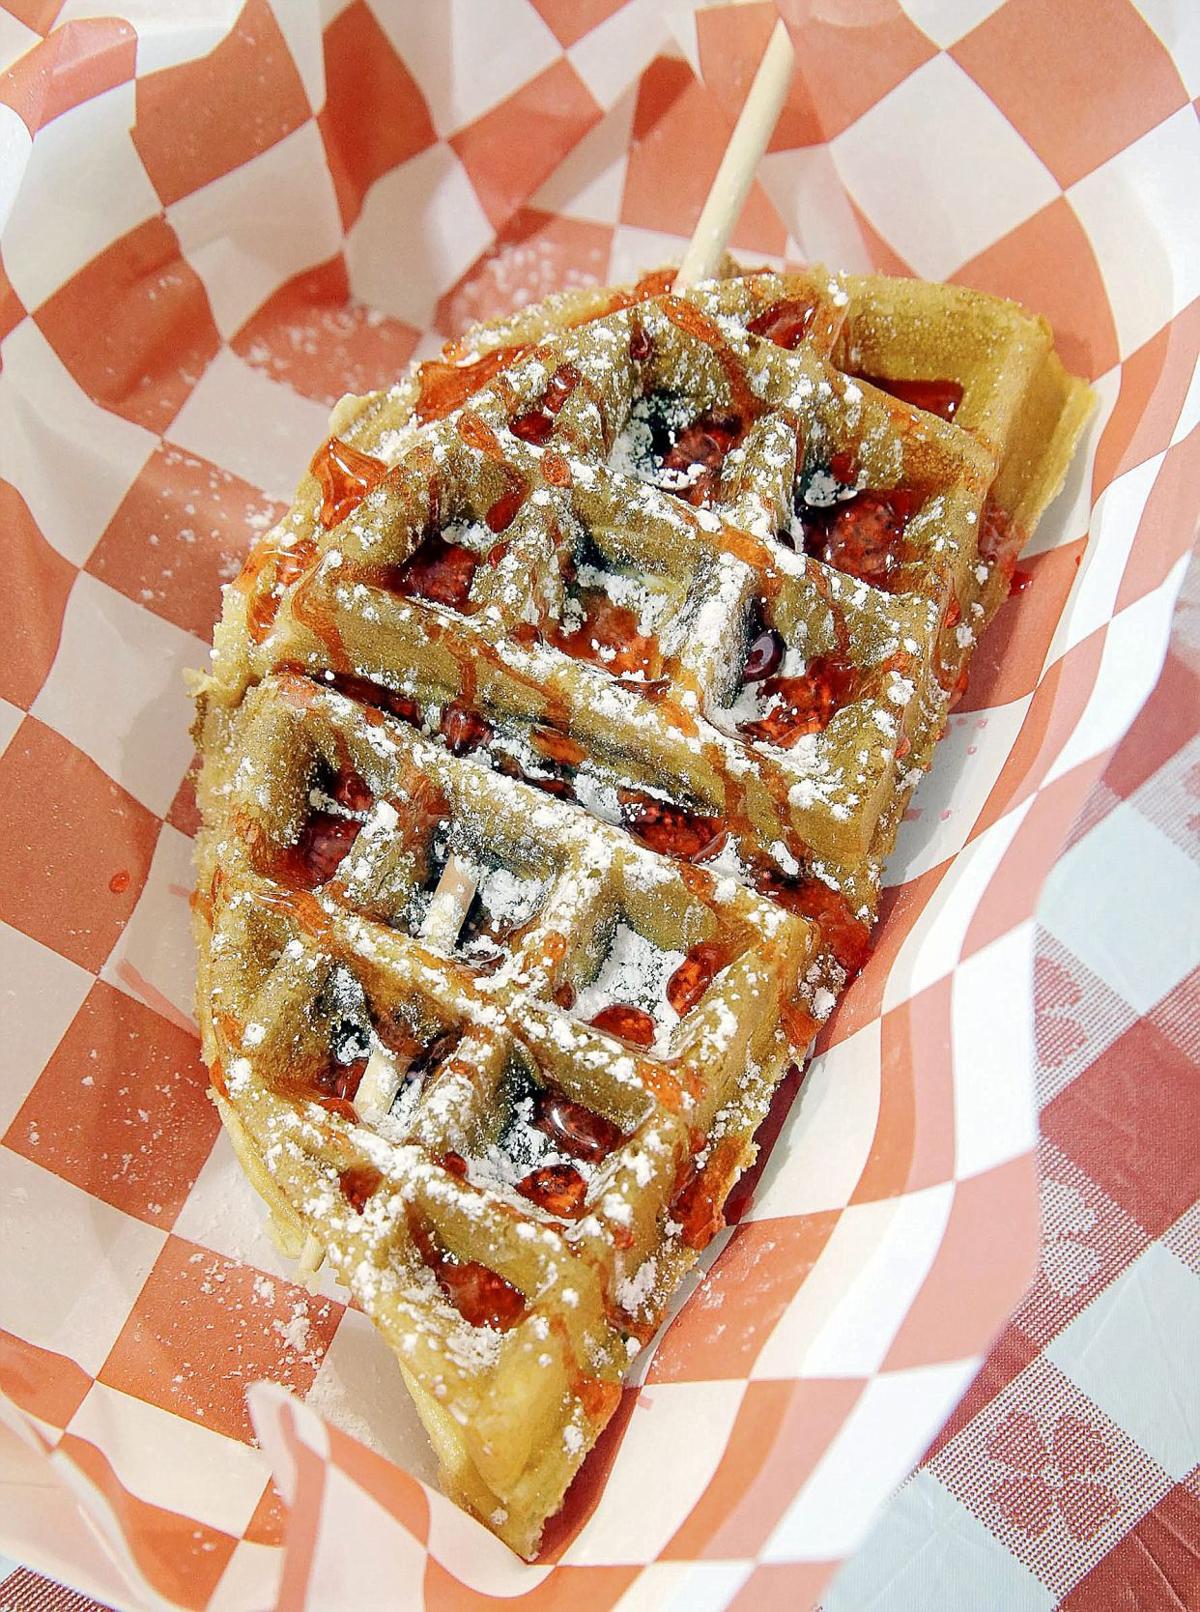 The newest foods at the Tulsa State Fair | Weekend magazine cover story | 0